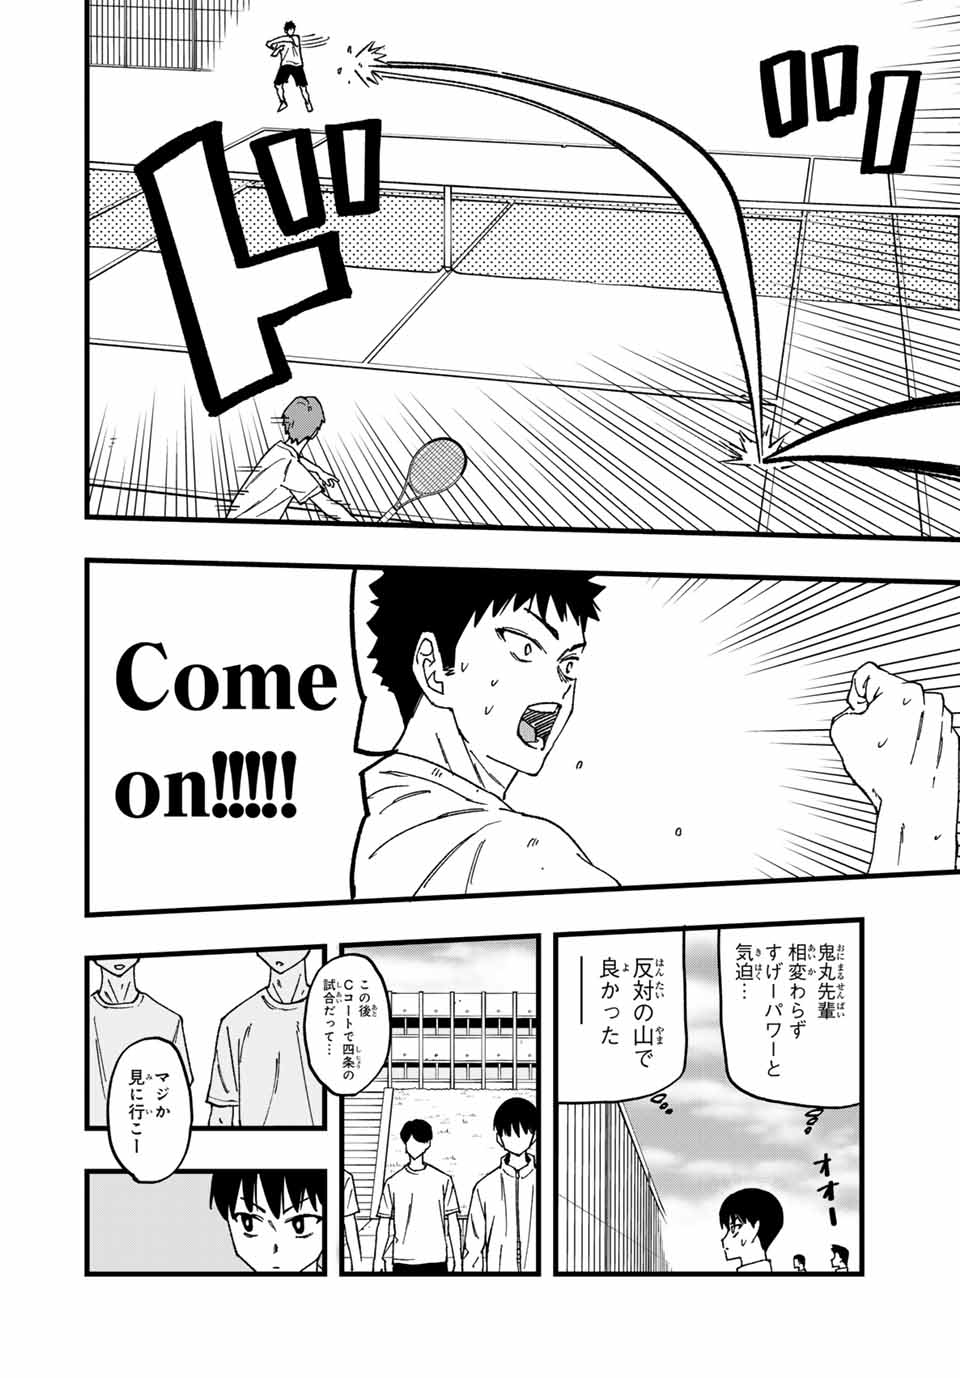 LoVE GAME 第4話 - Page 5